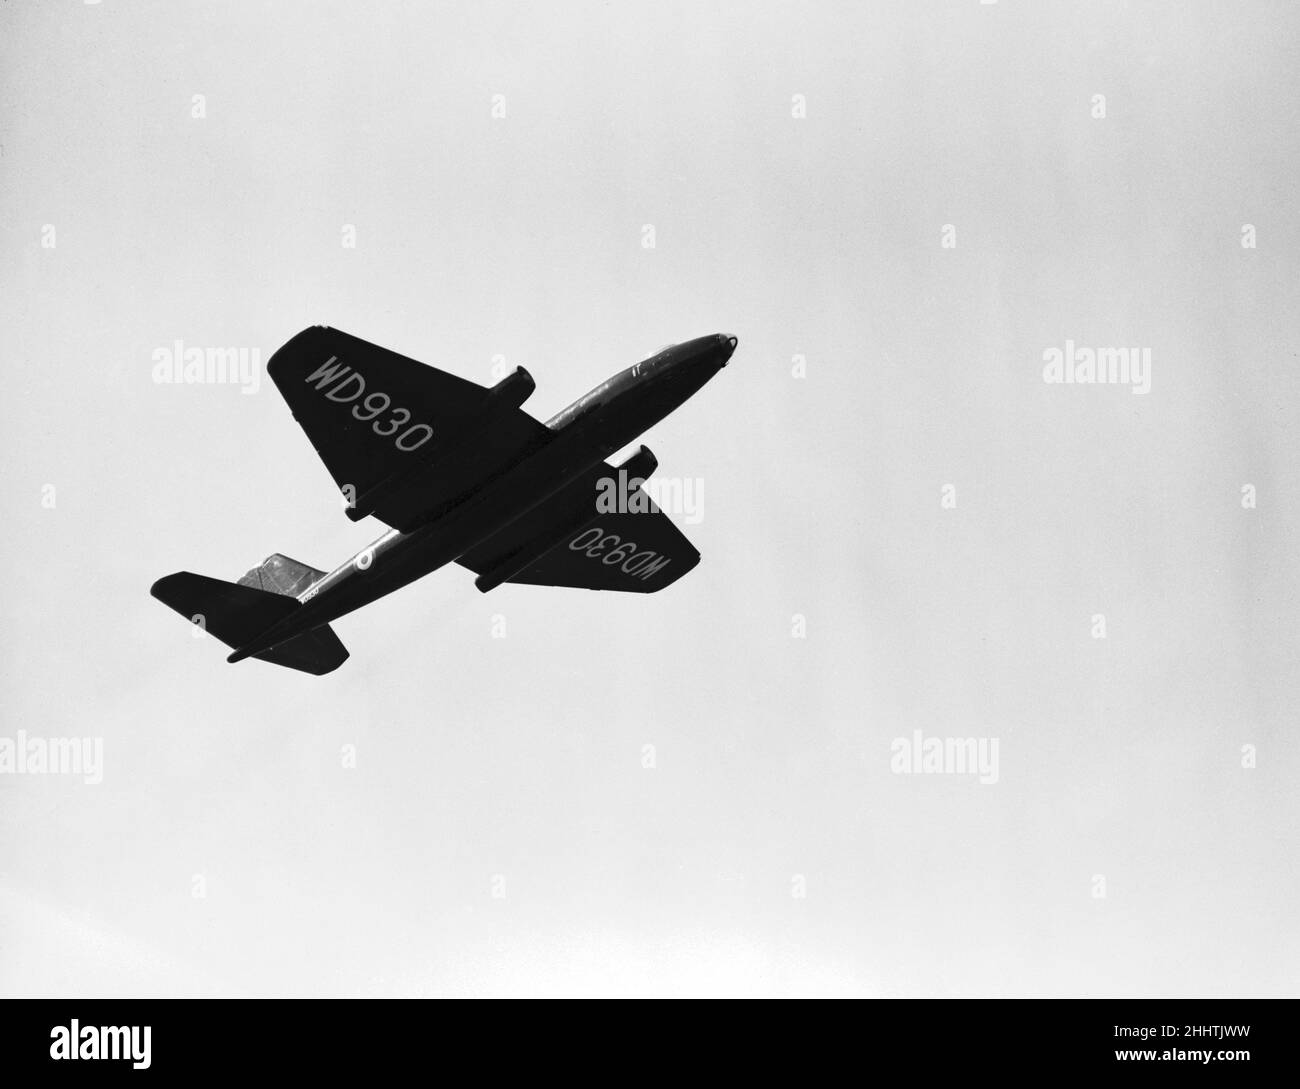 Farnborough Air Show vom 5th. Bis 11th. September 1953. Farnborough, Hampshire.The English Electric Canberra Jet in Flight. Stockfoto